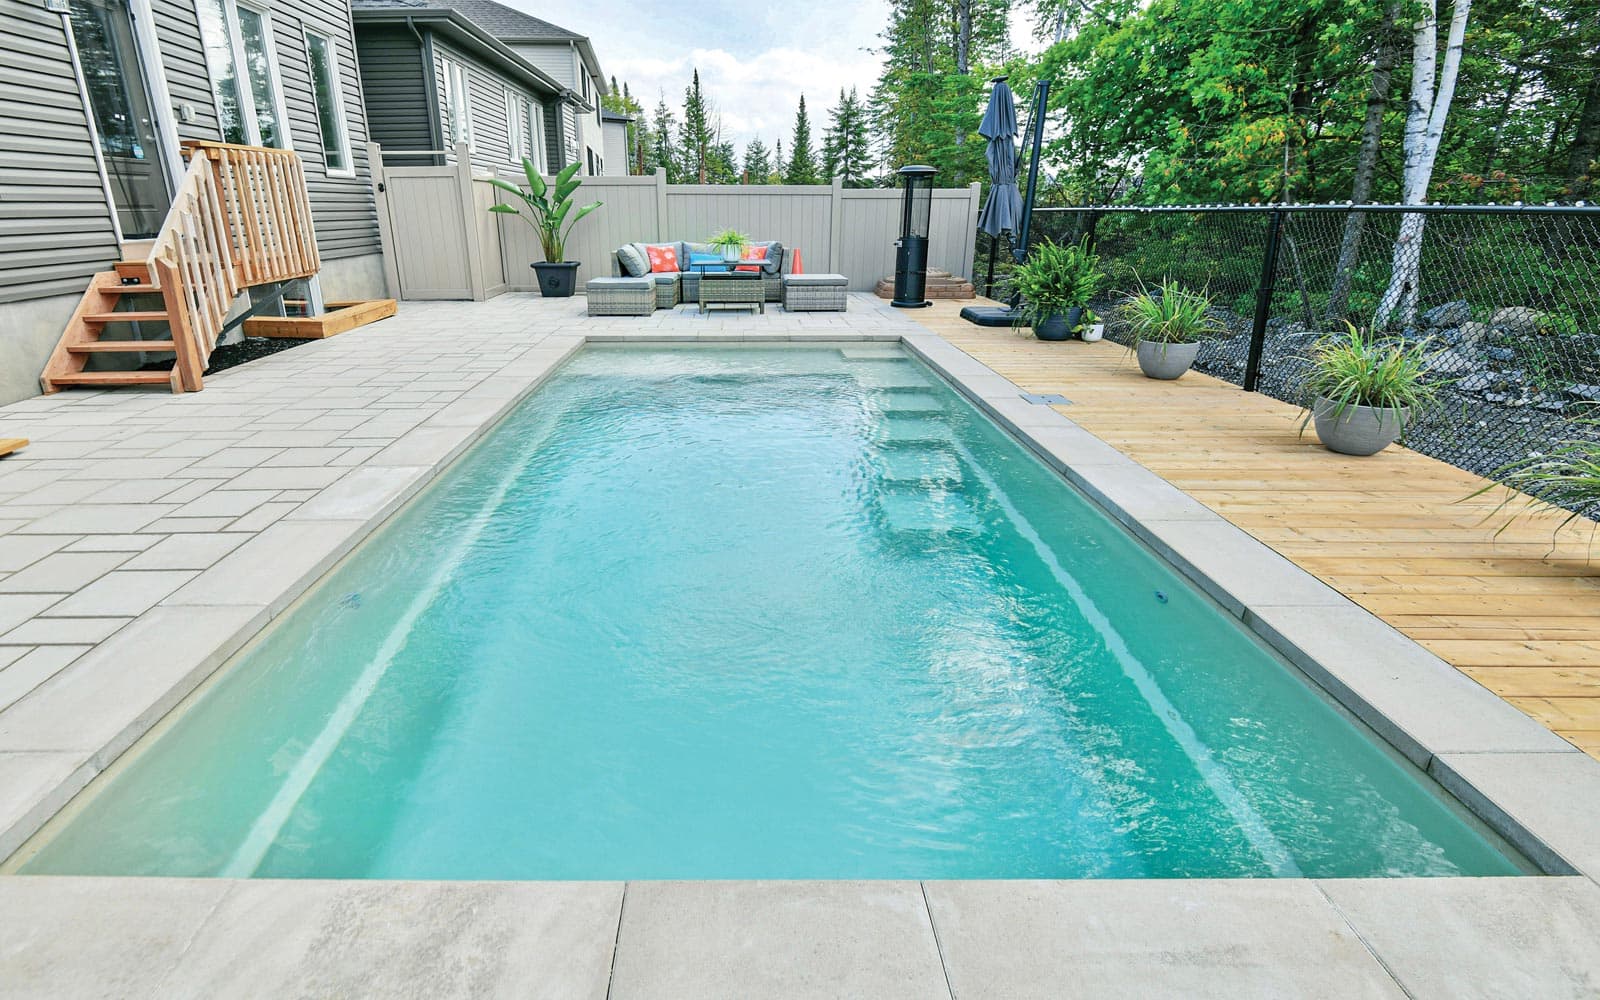 Why Fiberglass Pools Are The Most Affordable